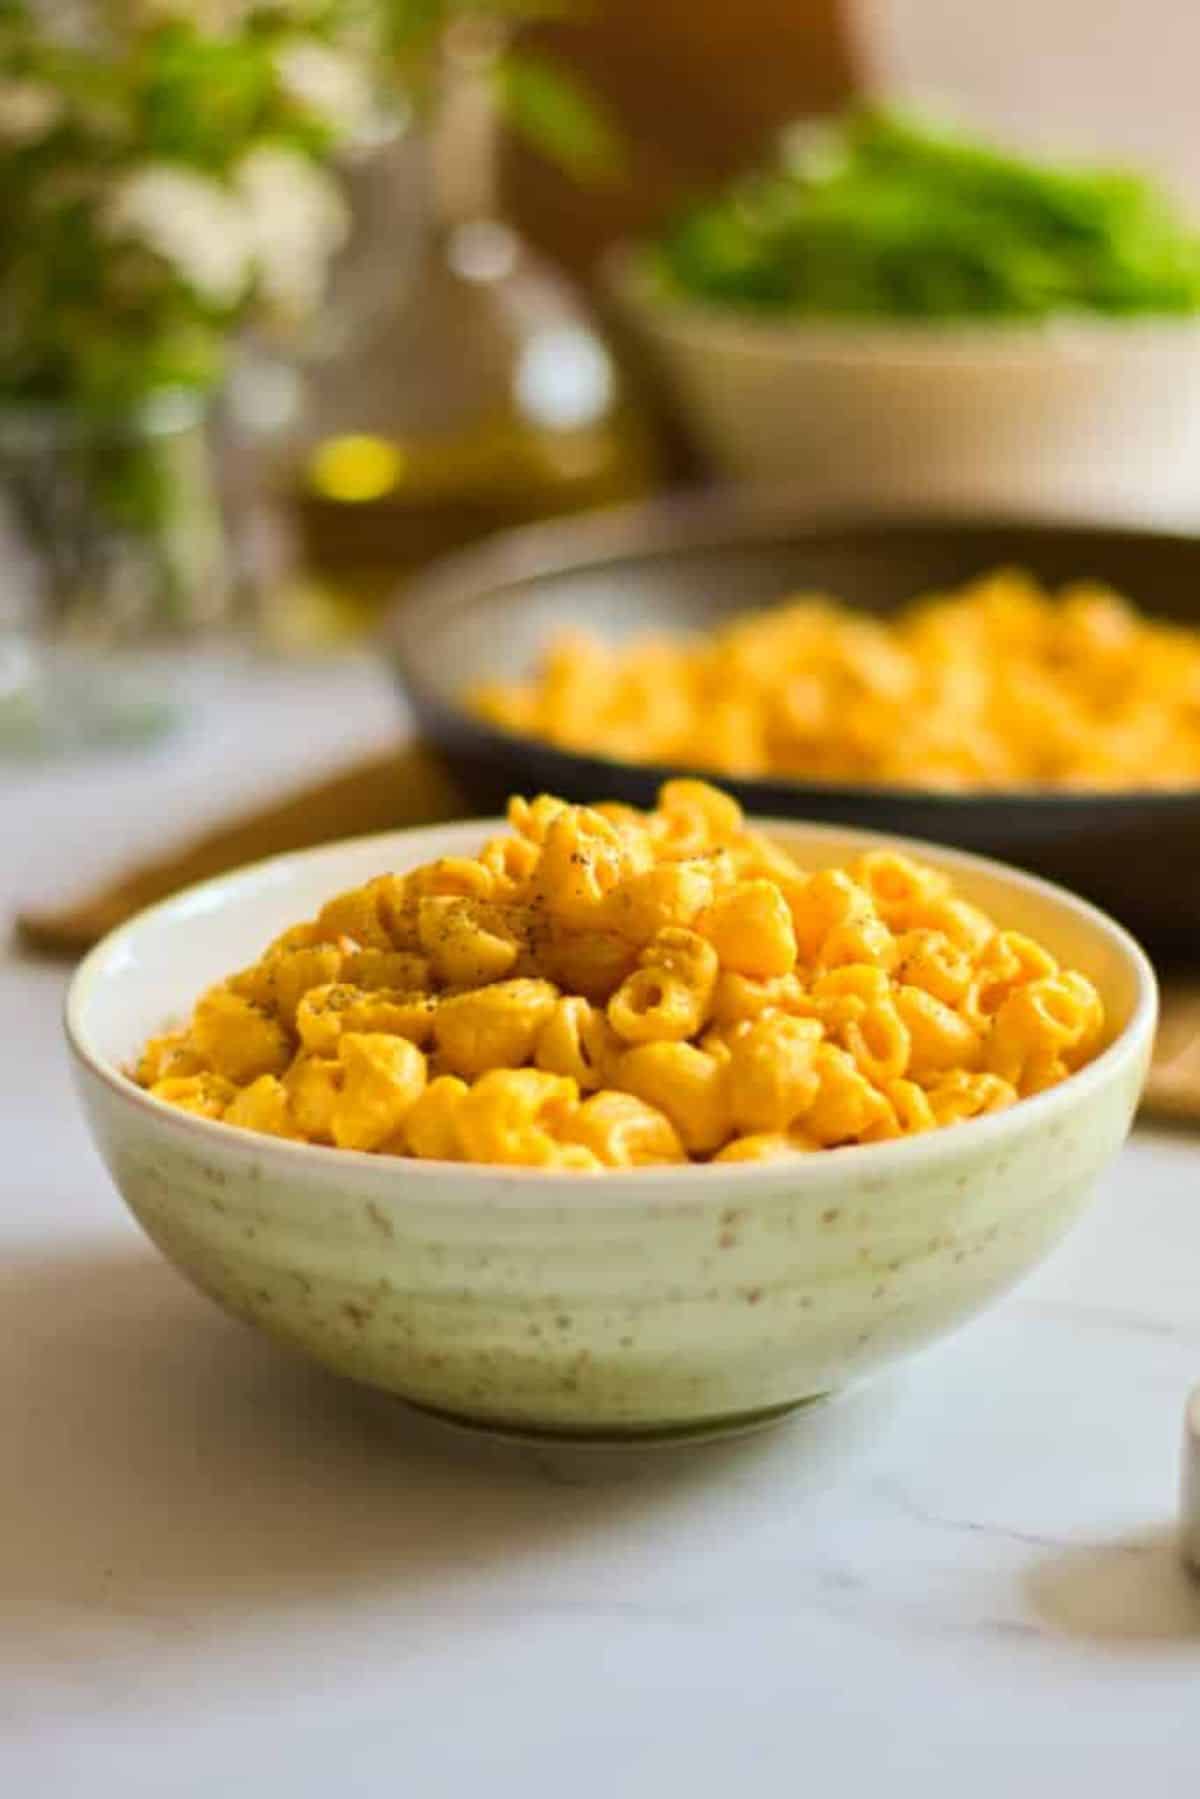 Delicious Gluten-Free Vegan Mac and Gluten-free Cheese with Potatoes and Carrots in a bowl.